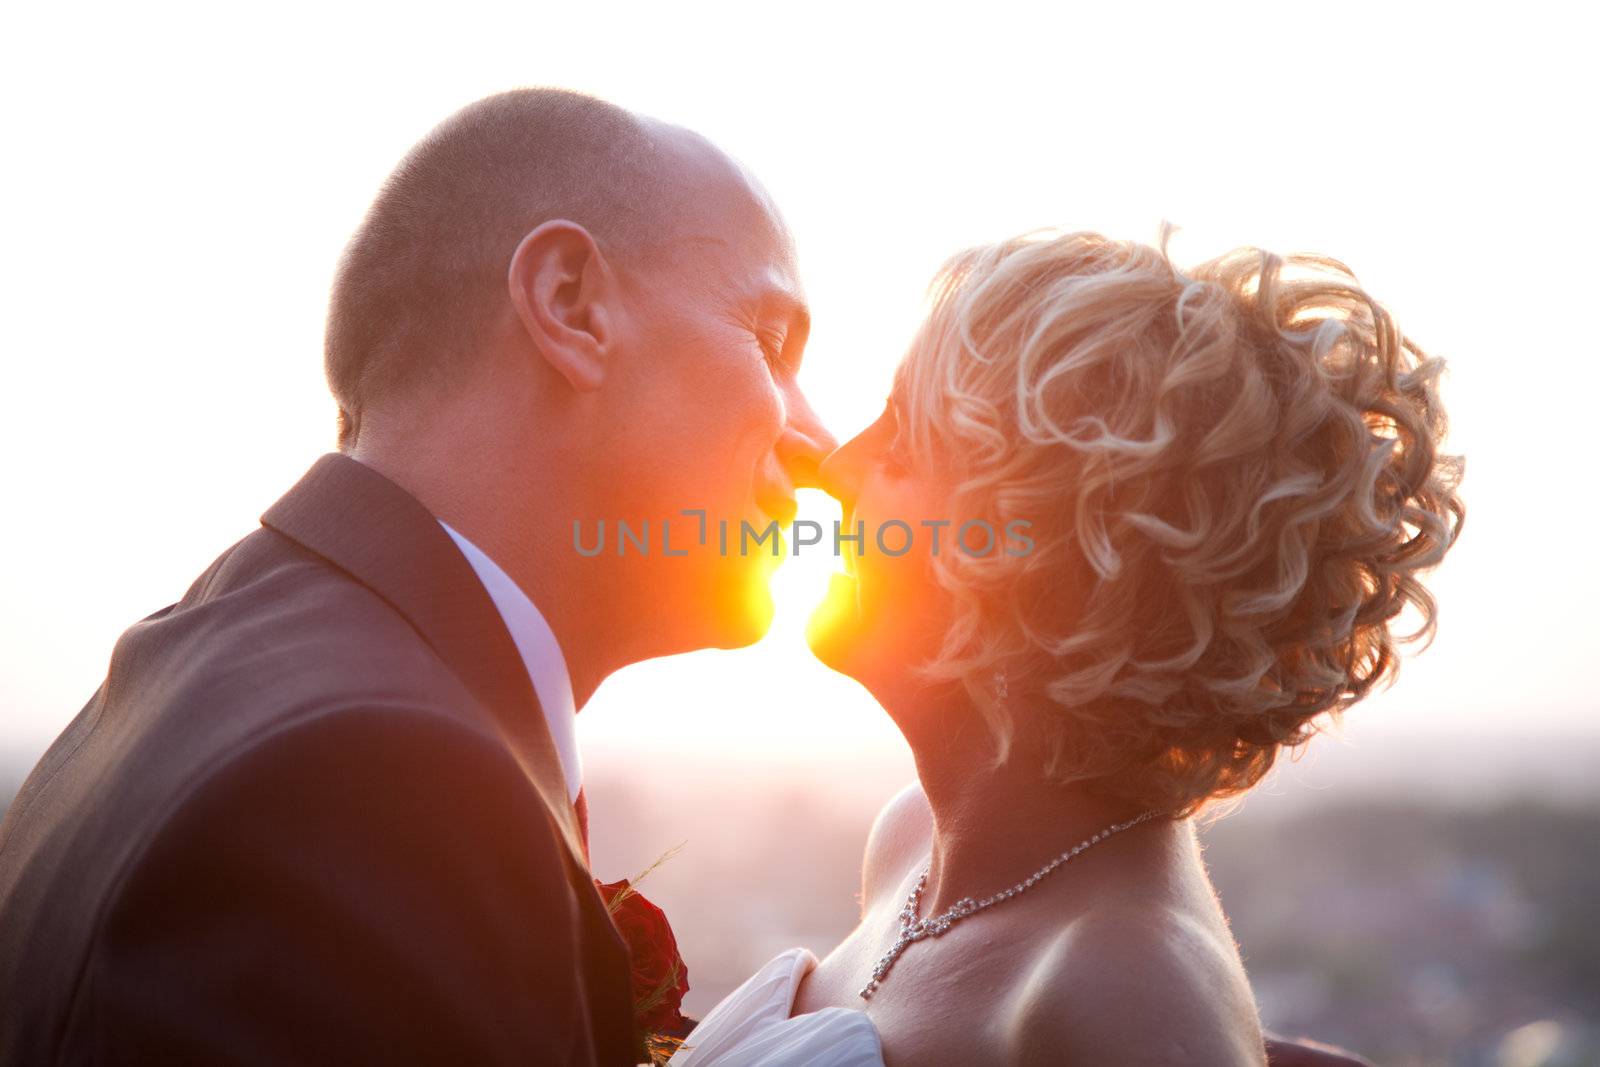 Bride and groom kissing at sunset by photocreo